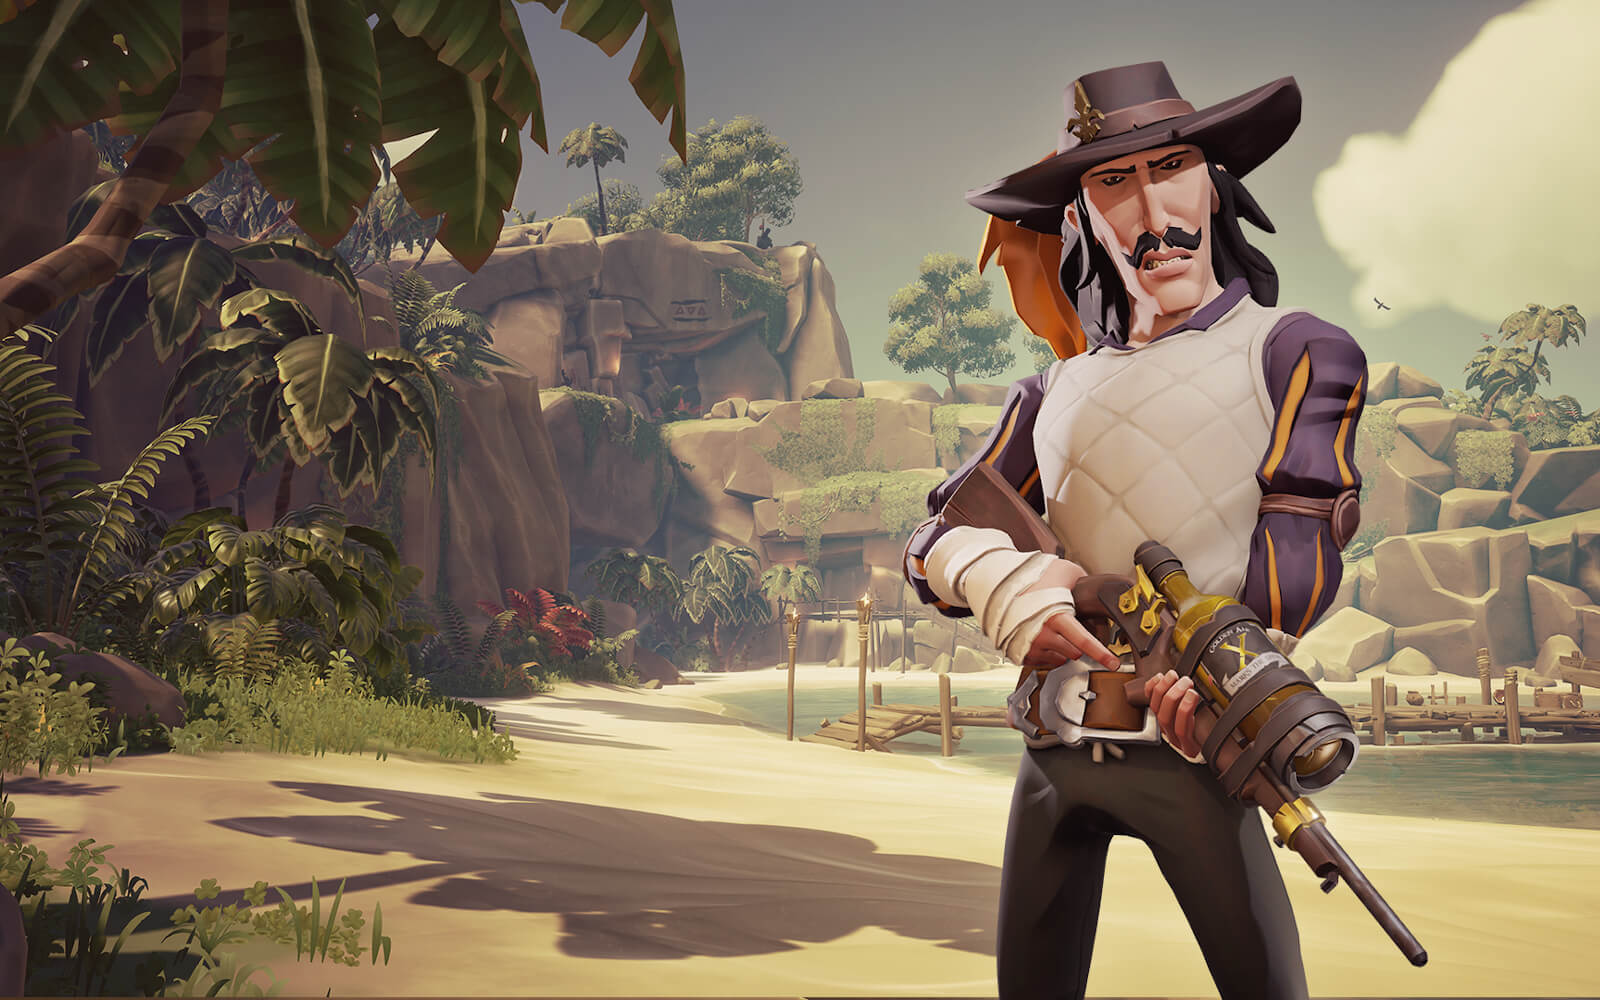 Image for Sea of Thieves is "coming soon" to Steam with cross-play